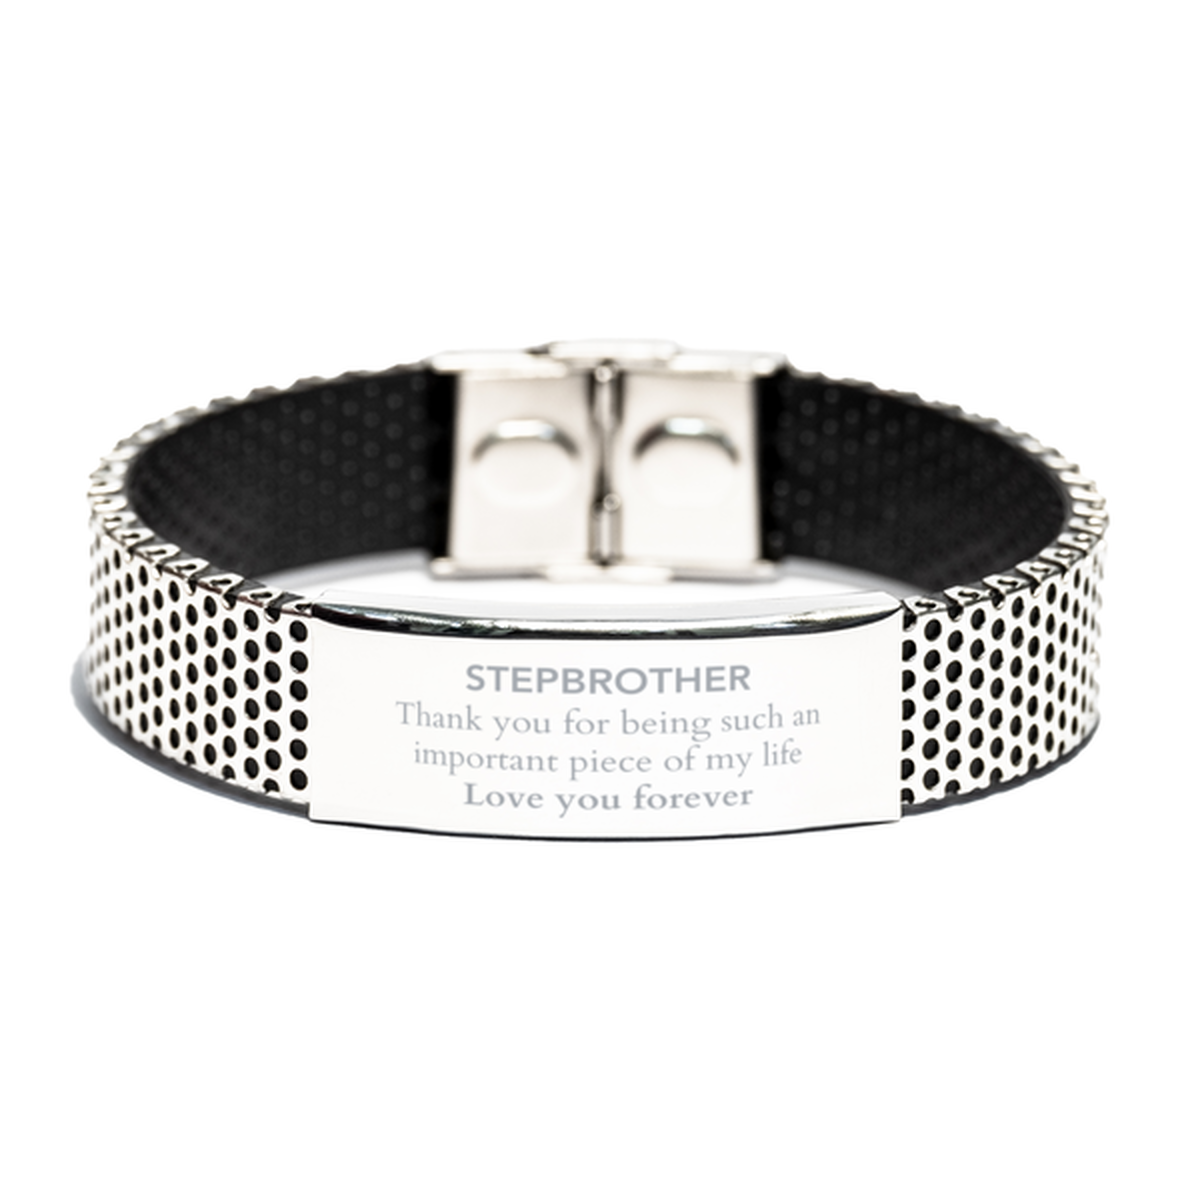 Appropriate Stepbrother Stainless Steel Bracelet Epic Birthday Gifts for Stepbrother Thank you for being such an important piece of my life Stepbrother Christmas Mothers Fathers Day